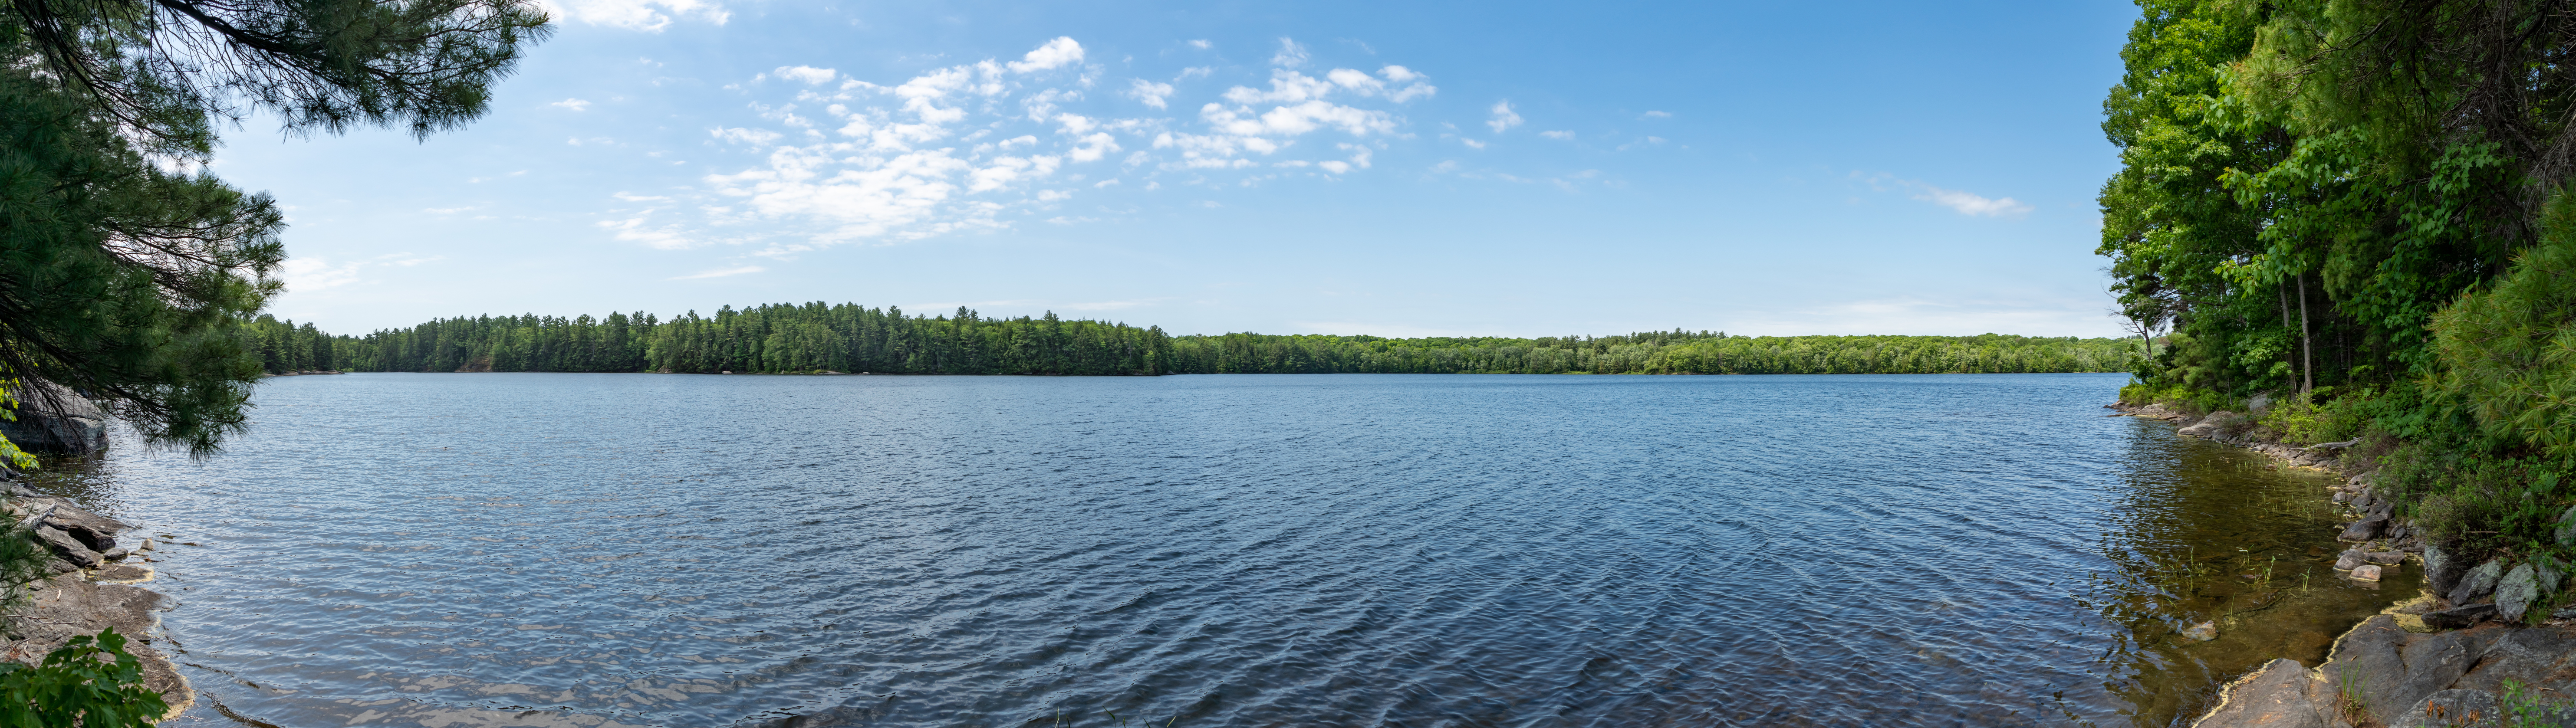 An image of a lake in Ontario